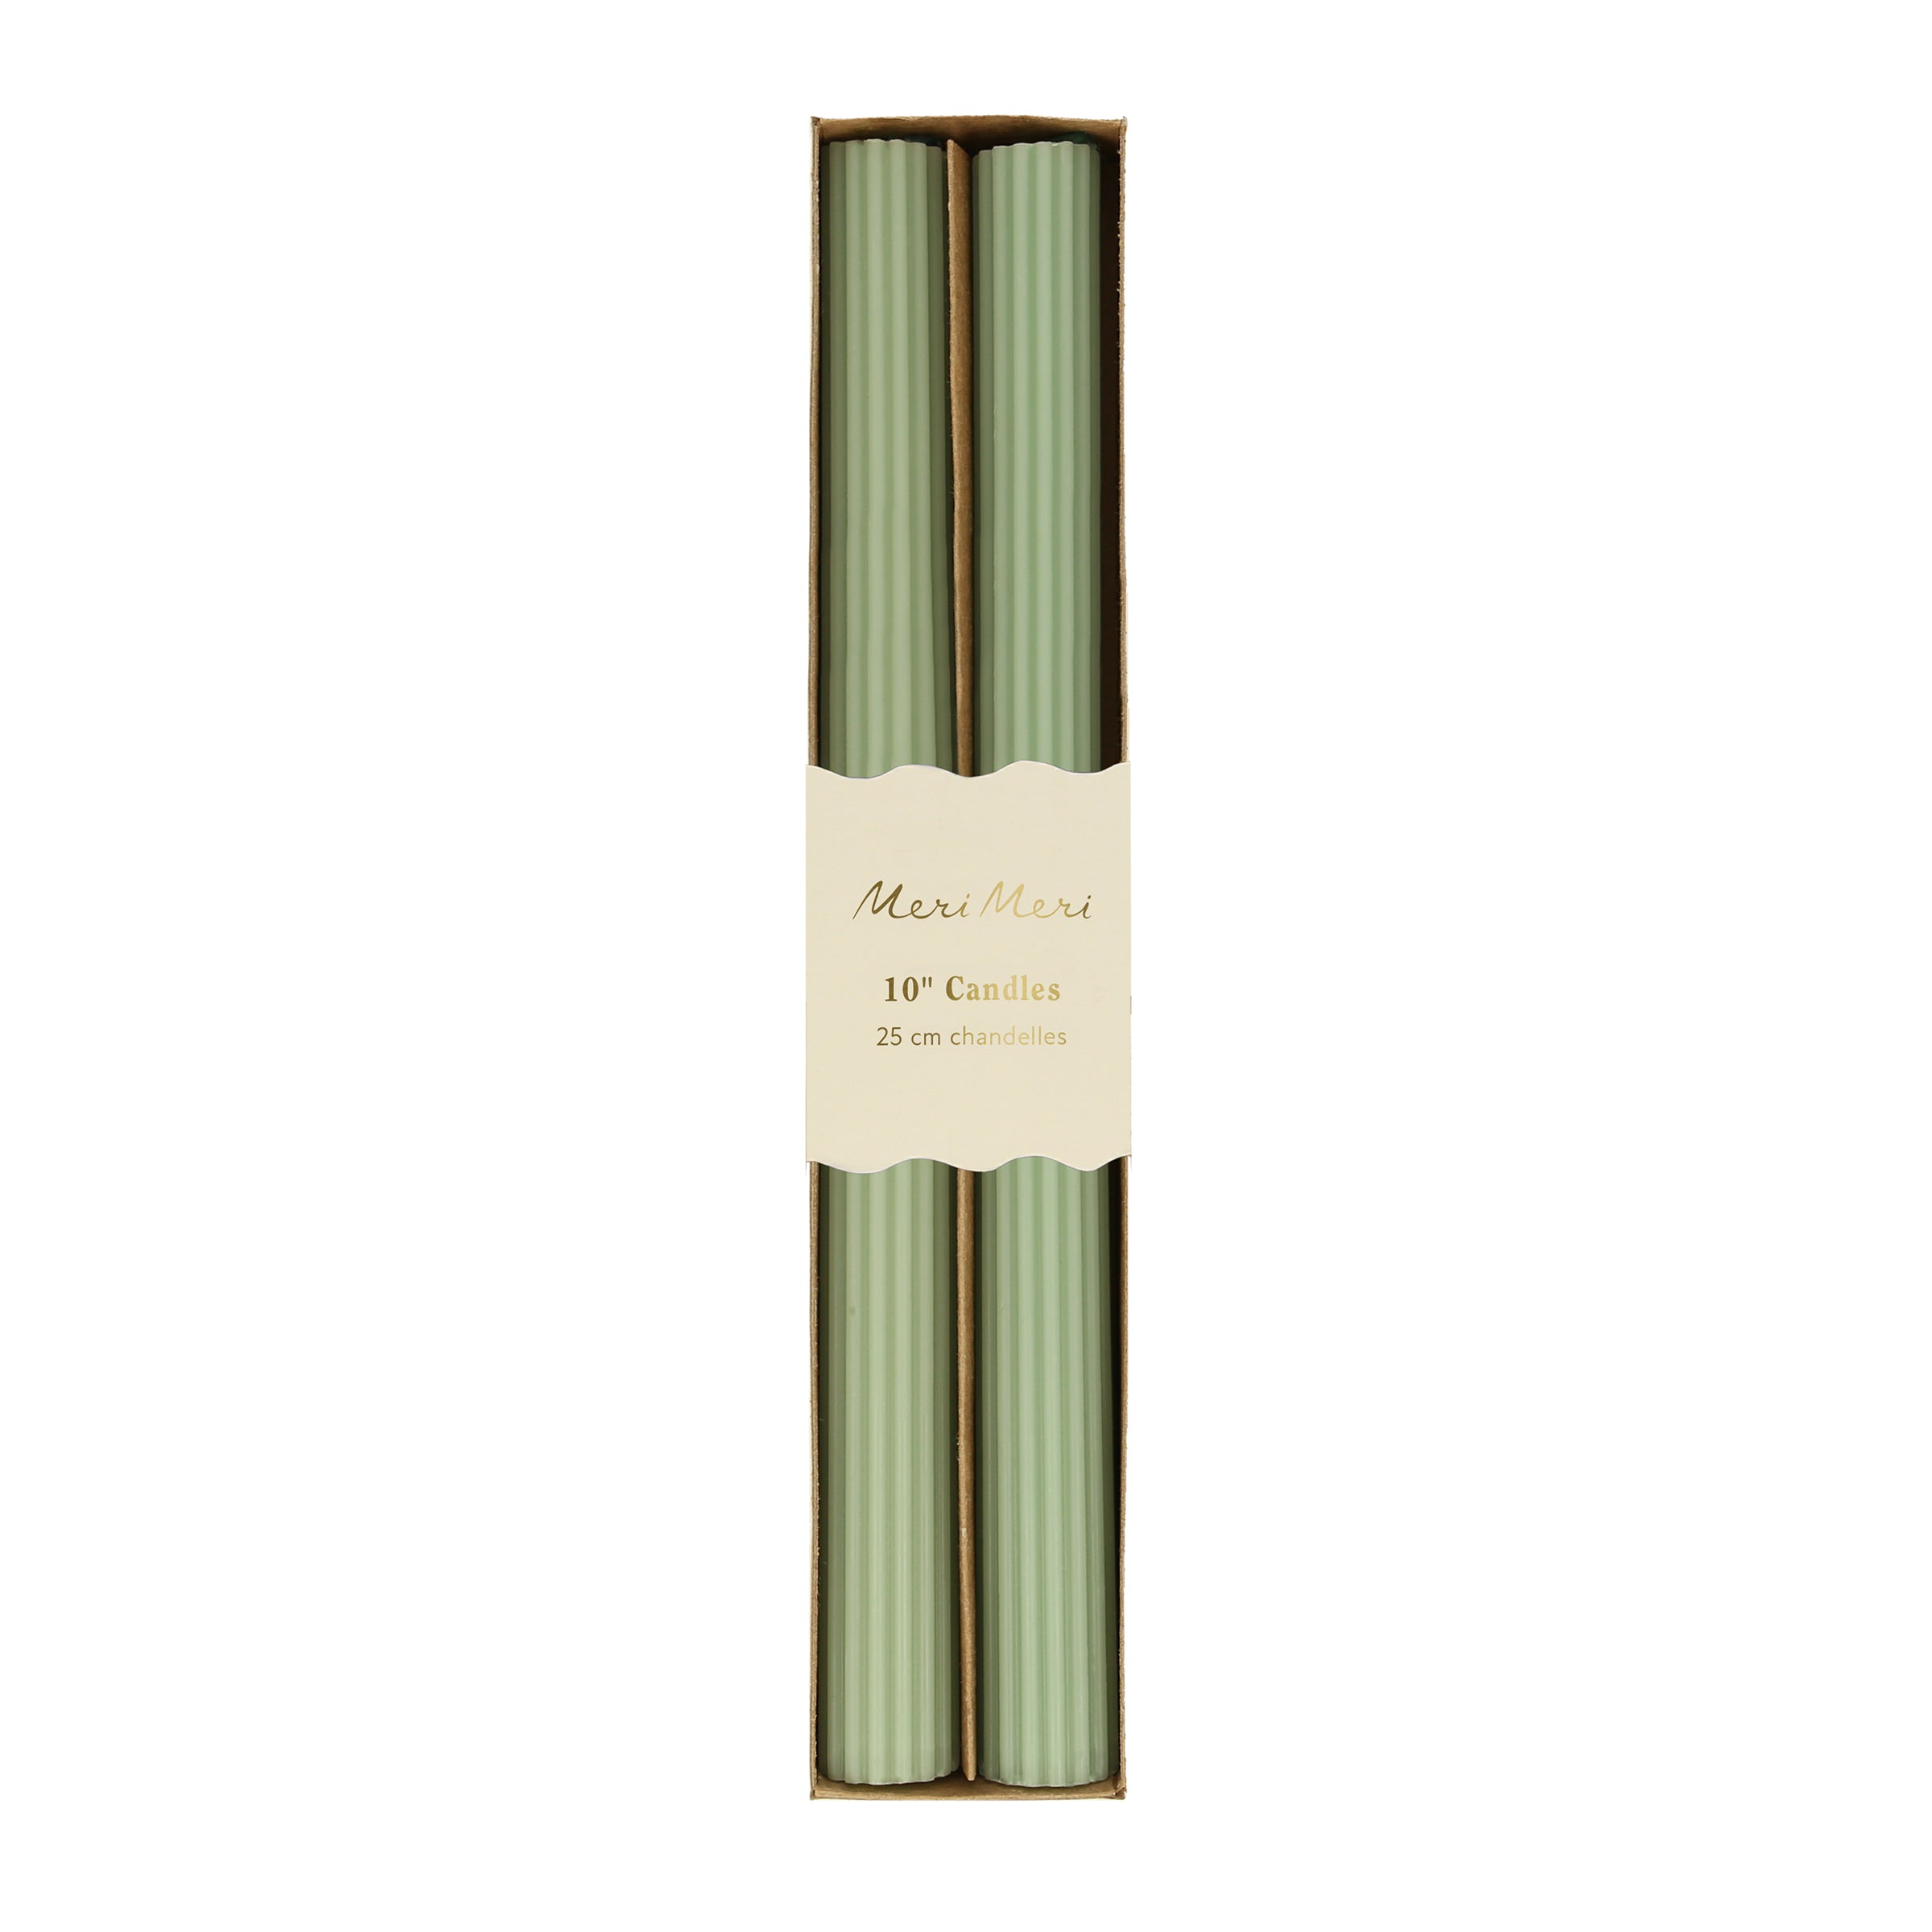 Our table candles, long with ridged details, are in a gorgeous green shade.